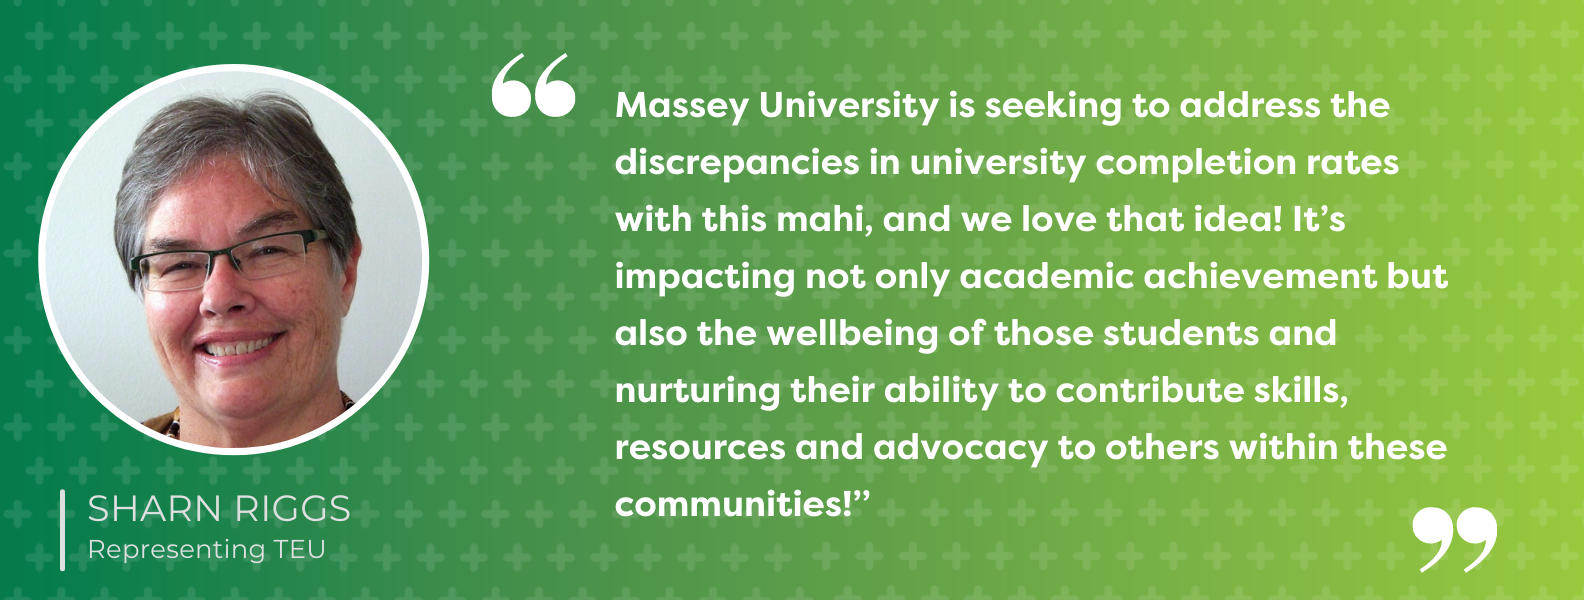 Sharn Riggs comment on Massey Uni Project